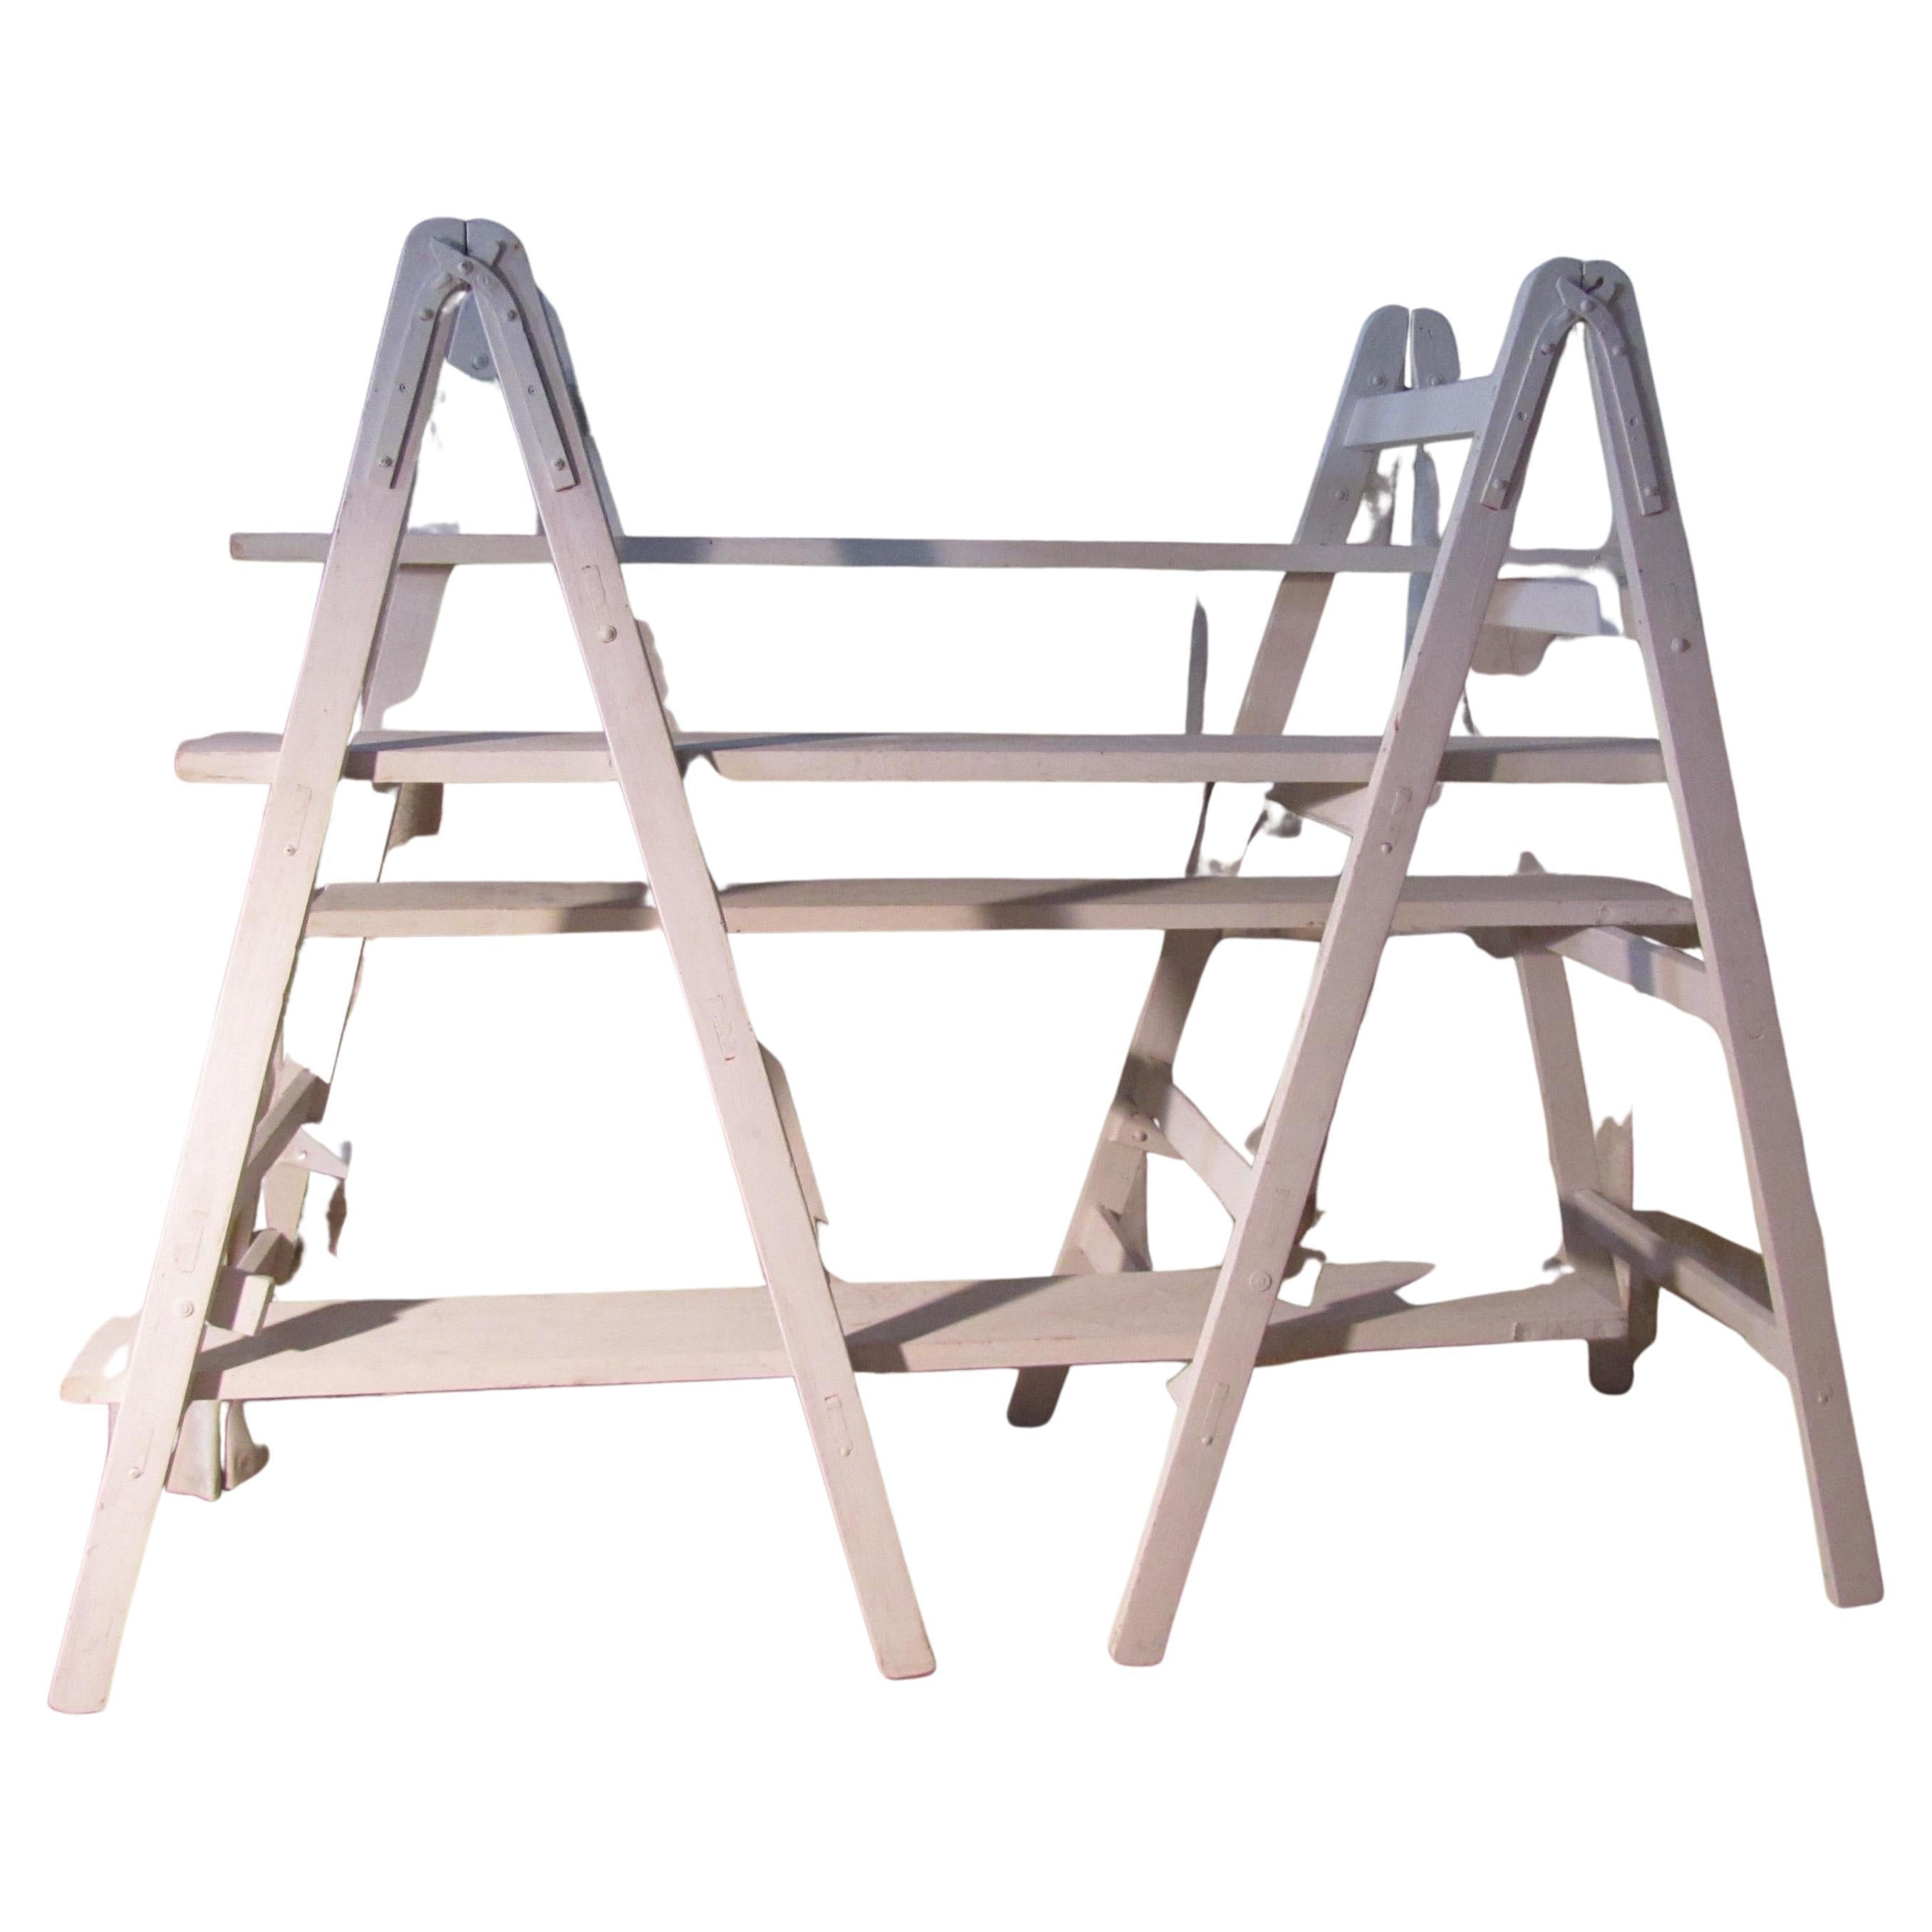 6ft Tall Shabby Painted Pair of Builder’s Trestles      For Sale